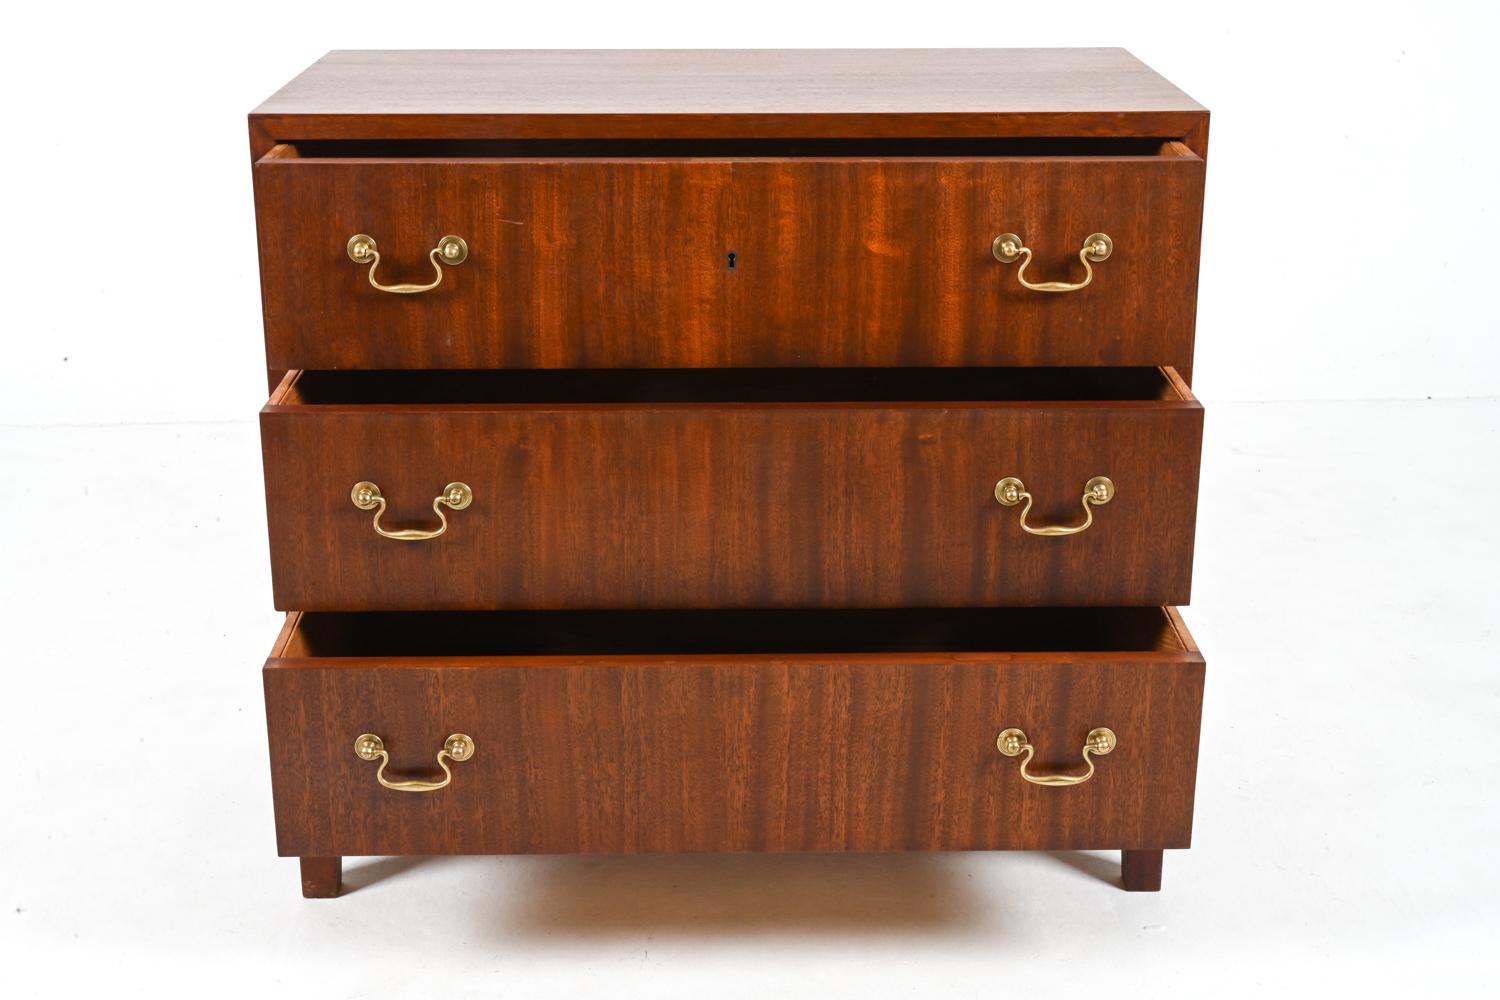 Rare Mahogany Three-Drawer Chest by Ole Wanscher for A. J. Iversen, c. 1940's For Sale 1